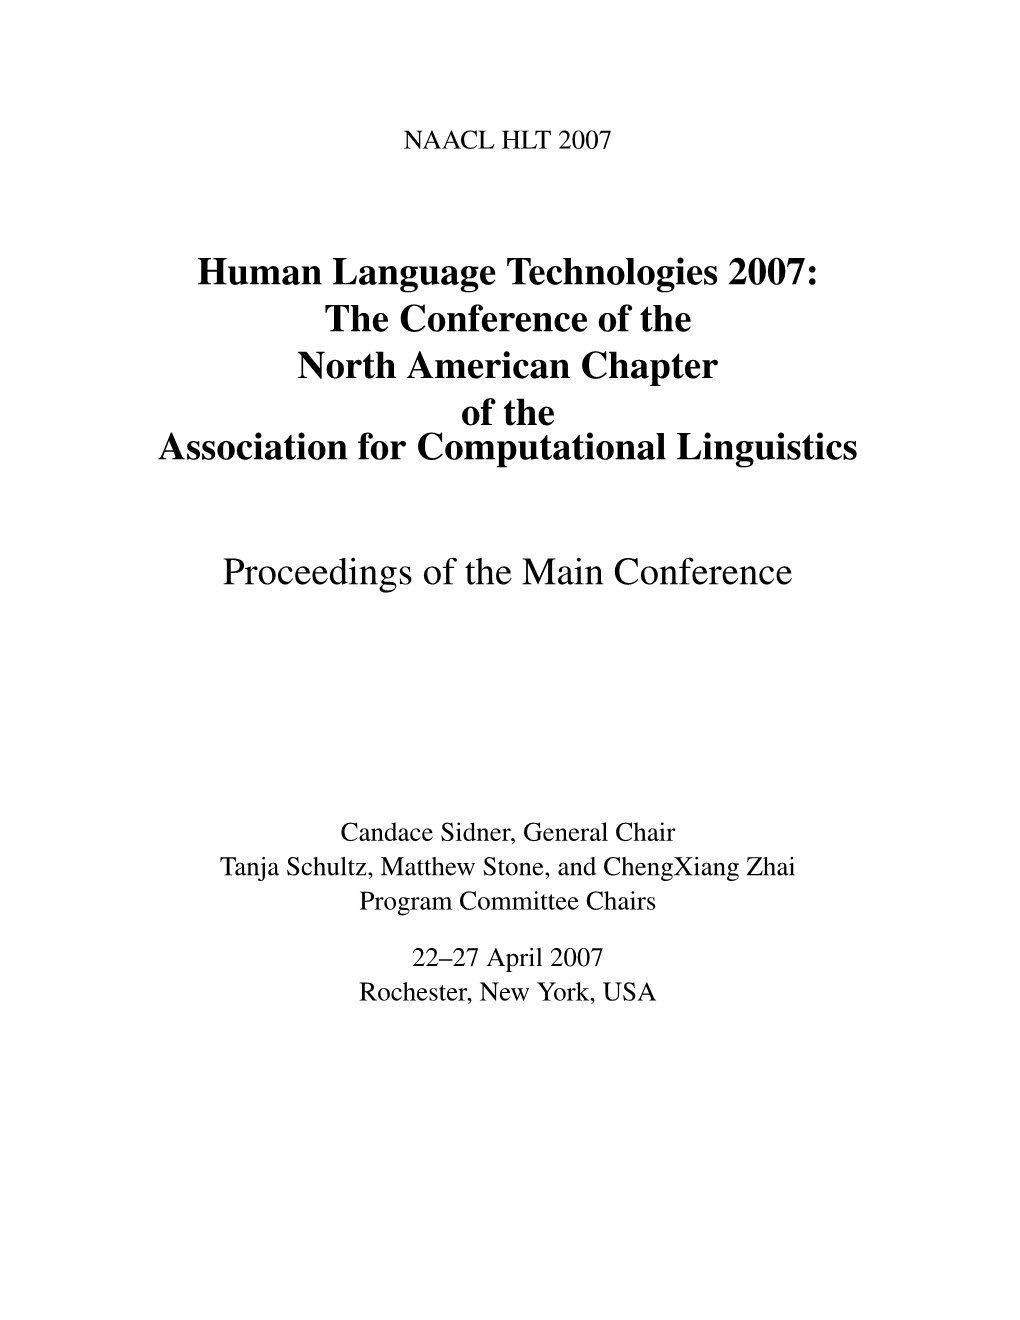 Human Language Technologies 2007: the Conference of the North American Chapter of the Association for Computational Linguistics